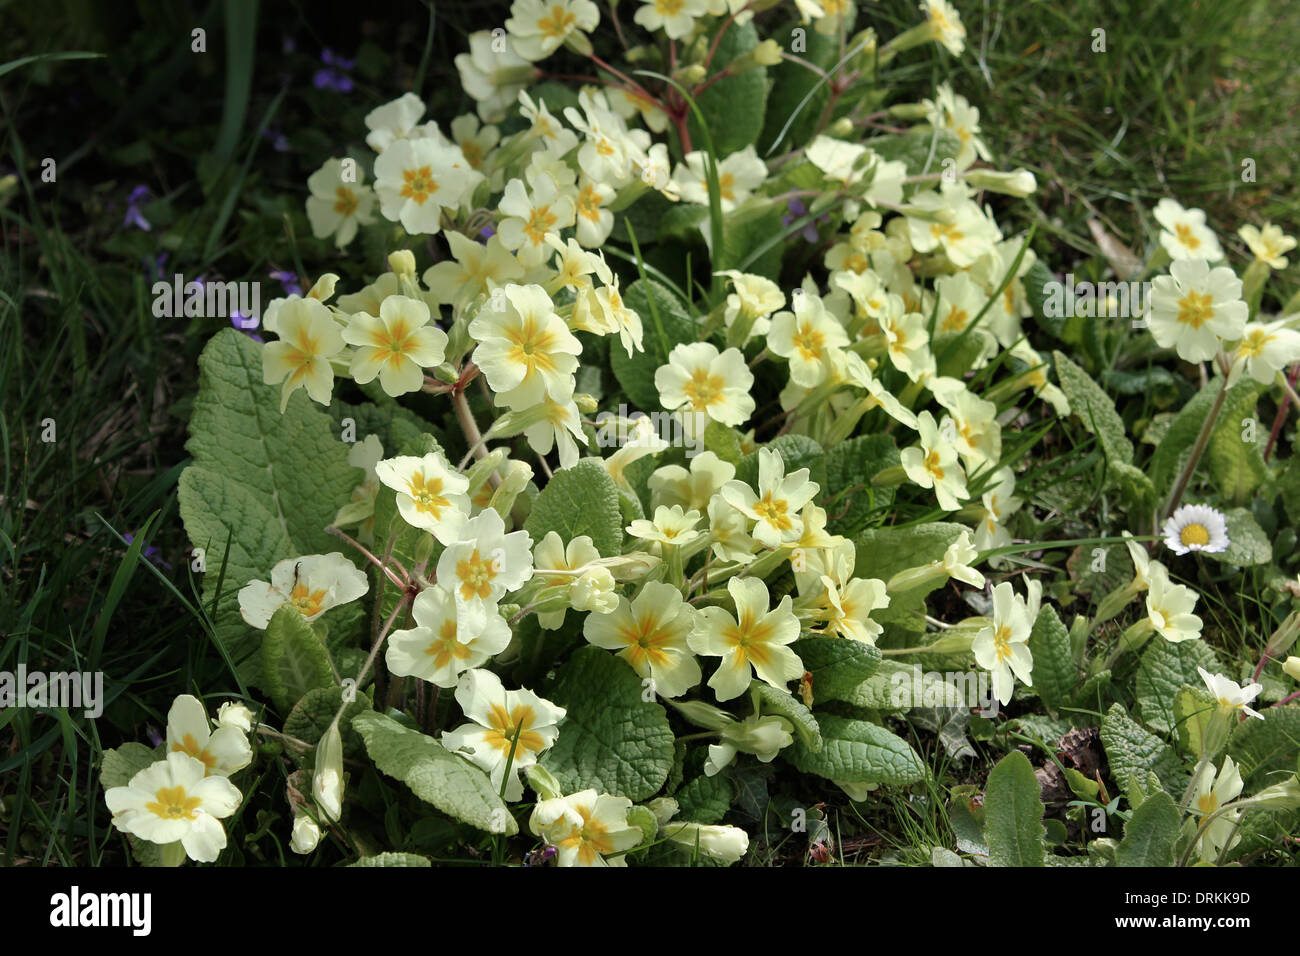 Spring primroses and violets in flower Stock Photo